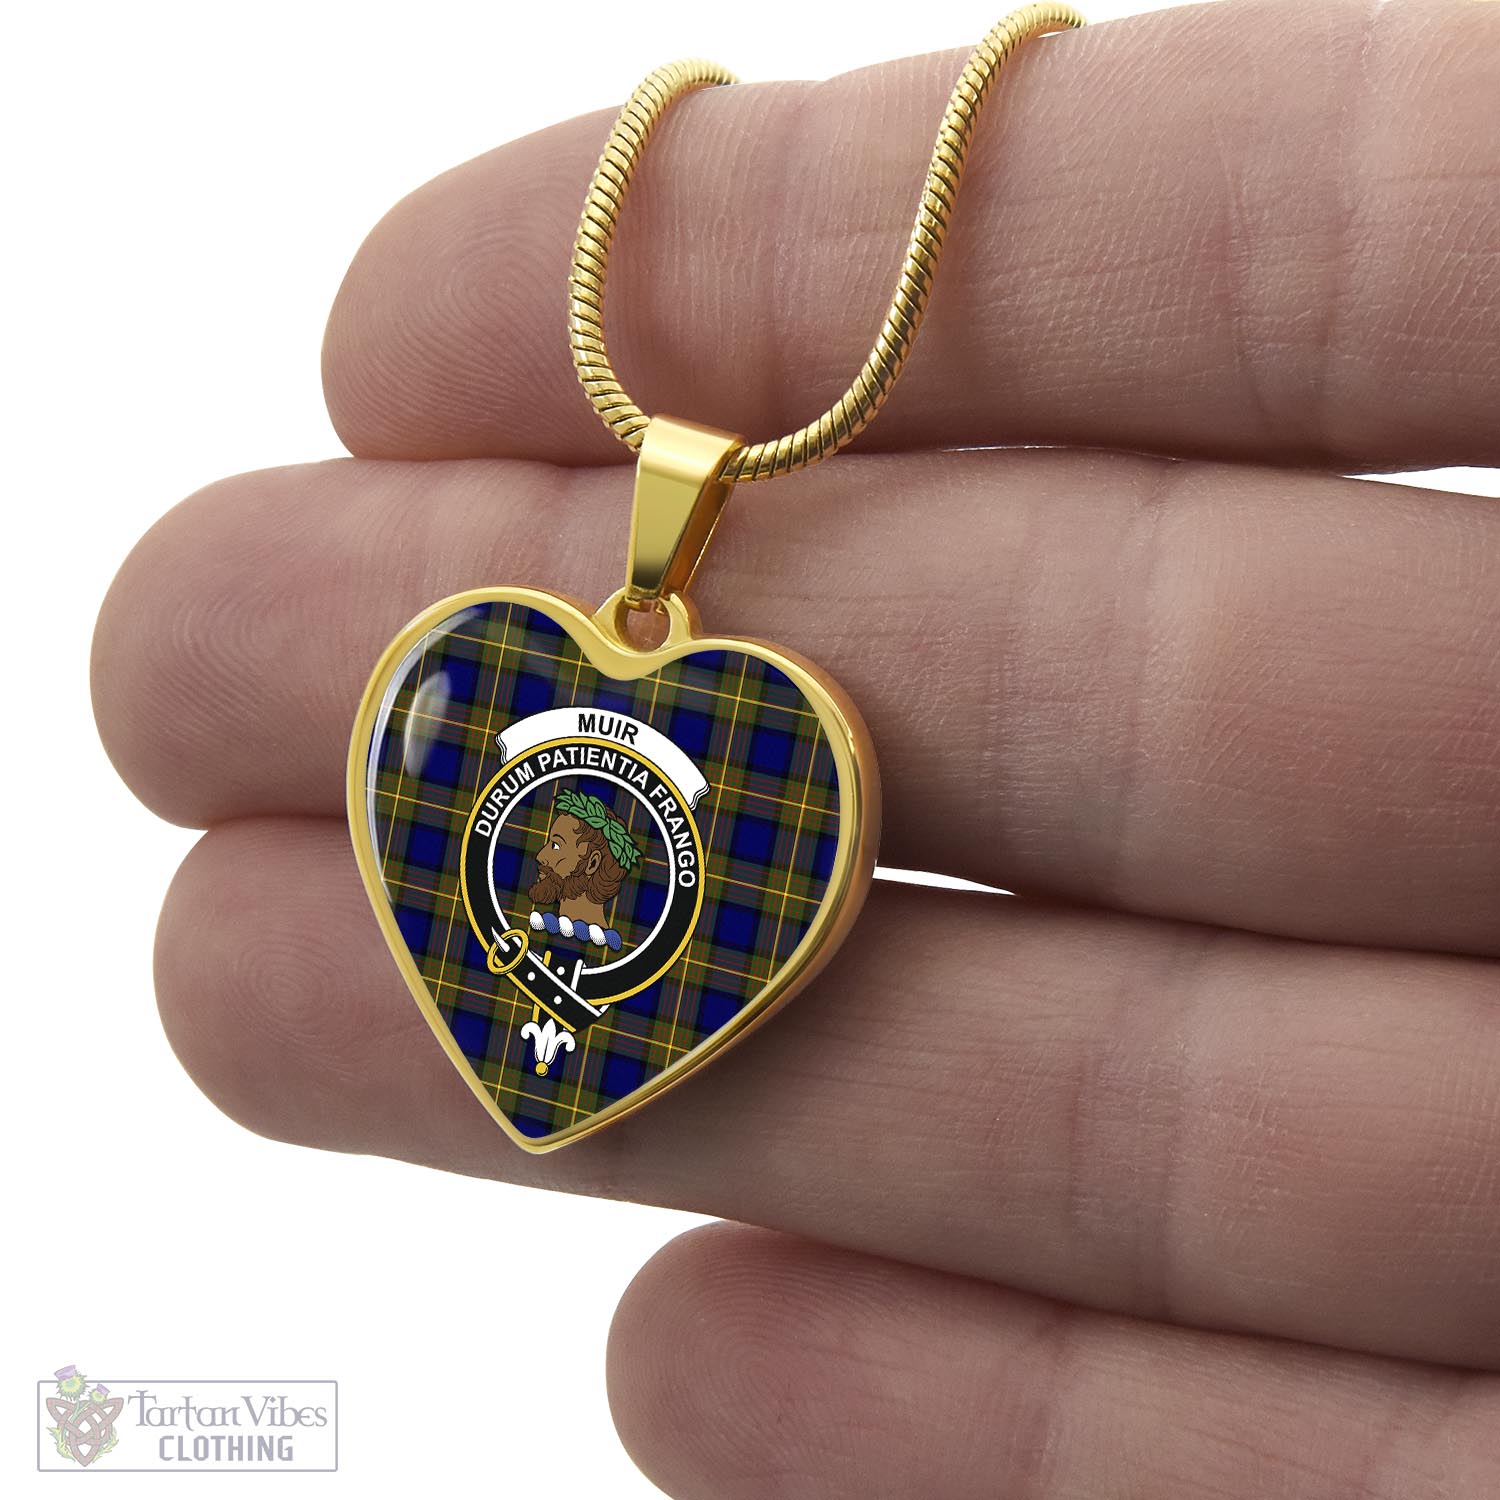 Tartan Vibes Clothing Muir Tartan Heart Necklace with Family Crest